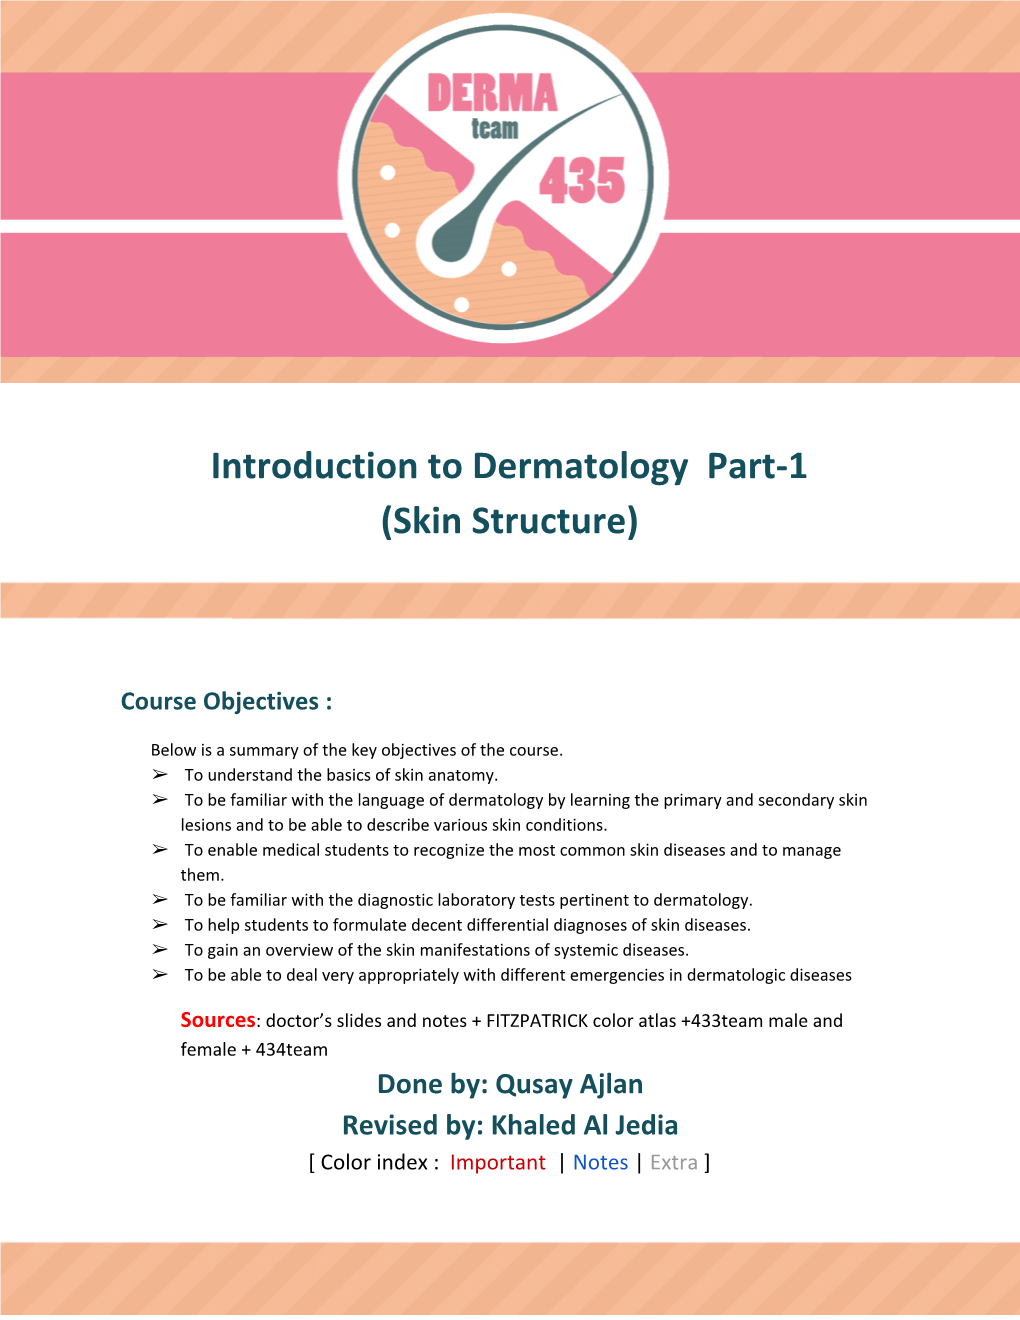 Introduction to Dermatology Part-1 (Skin Structure)